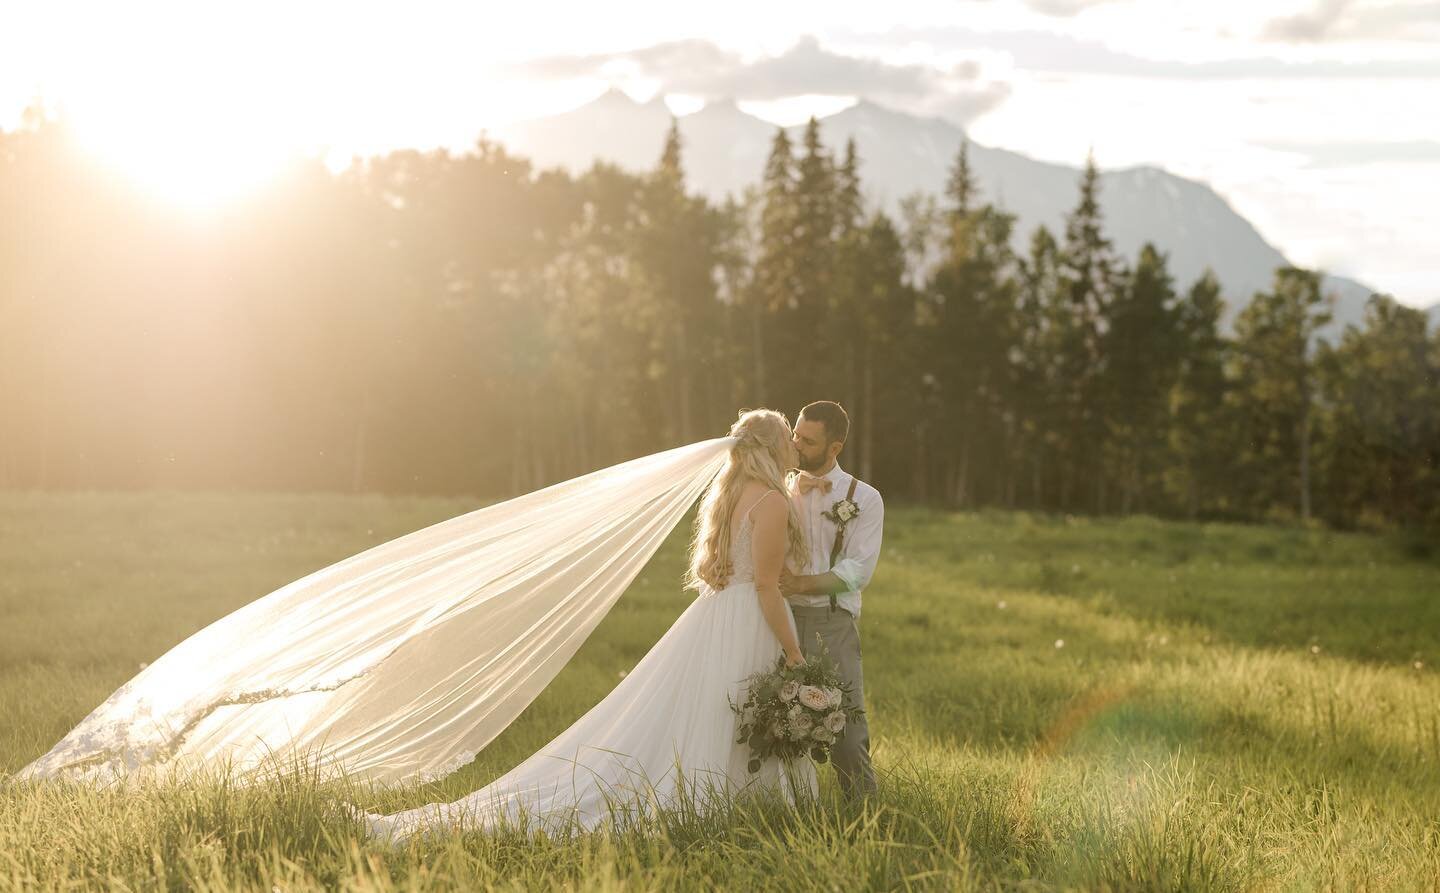 I had the privilege of working with Rebecca at the Bulkley Valley Christian School for several years, so watching her wedding dream come true was very special. The day was a magical fairytale. Her style and vision for the her wedding definitely match